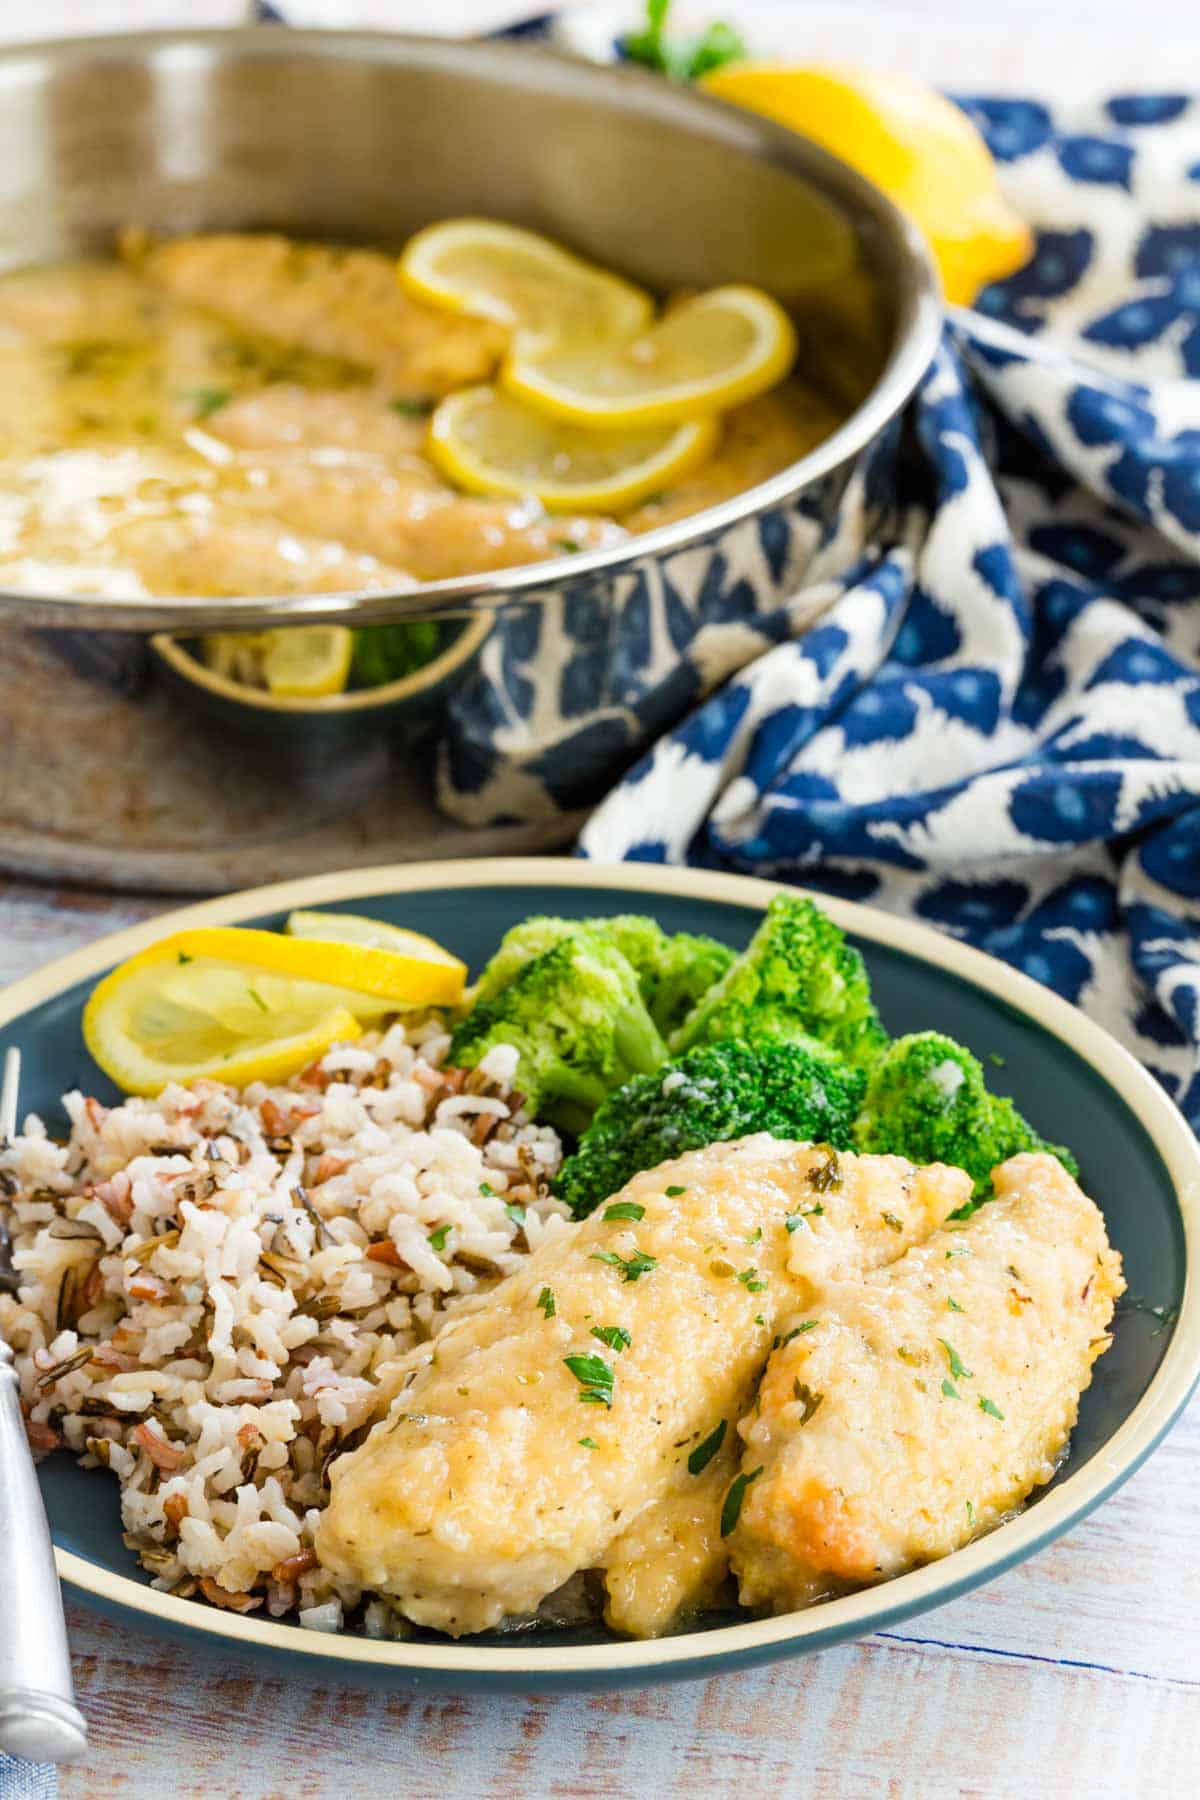 Three pieces of lemon chicken on a plate with wild rice and broccoli